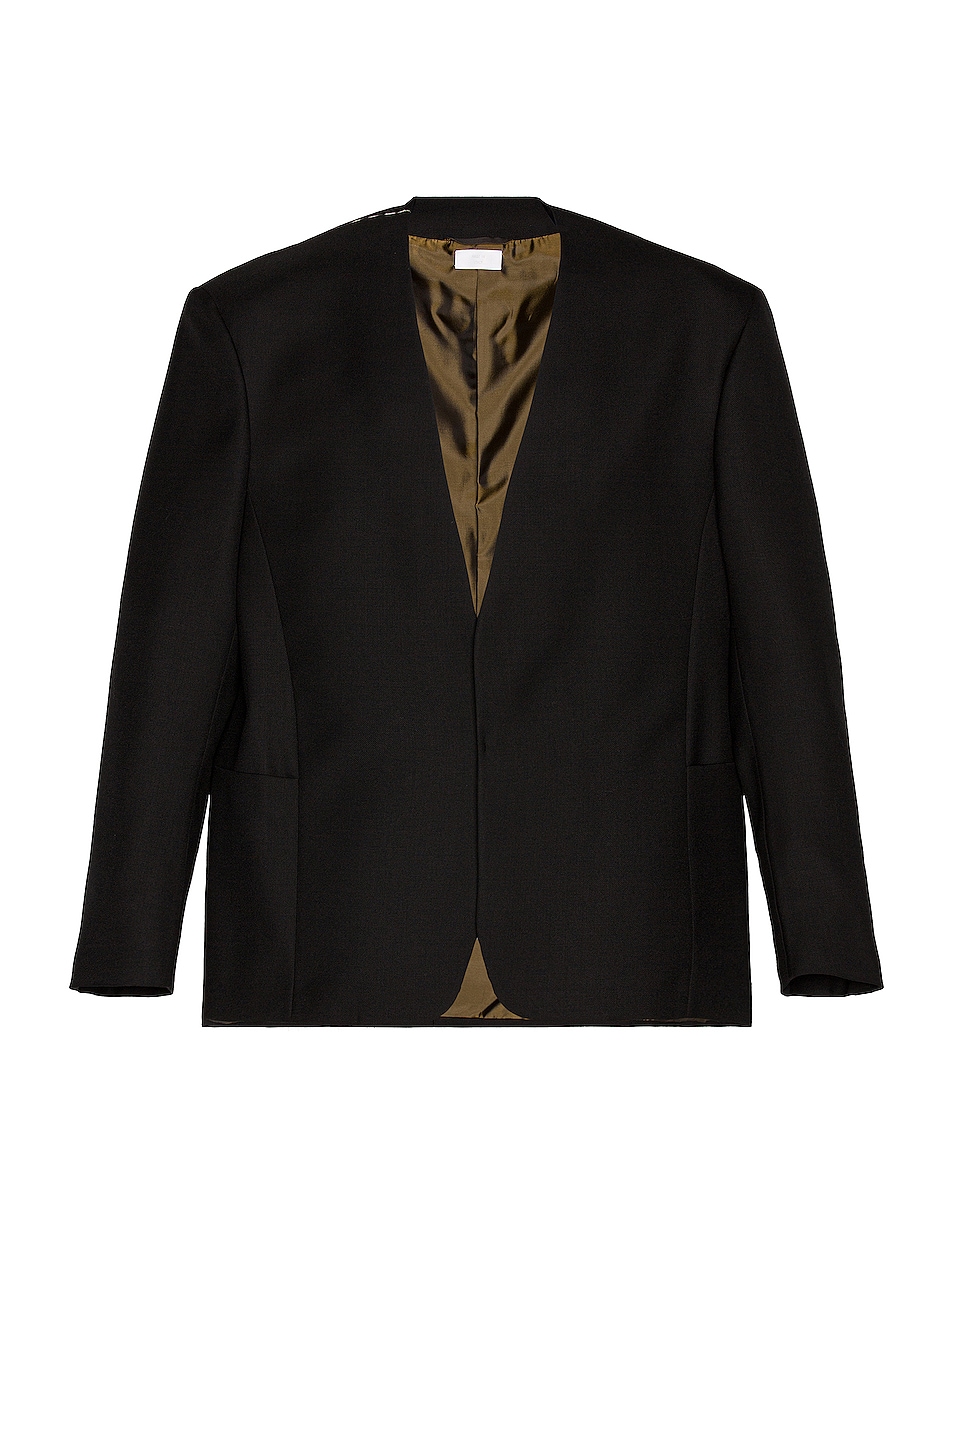 Image 1 of Fear of God Exclusively for Ermenegildo Zegna Single Breasted Jacket in Black